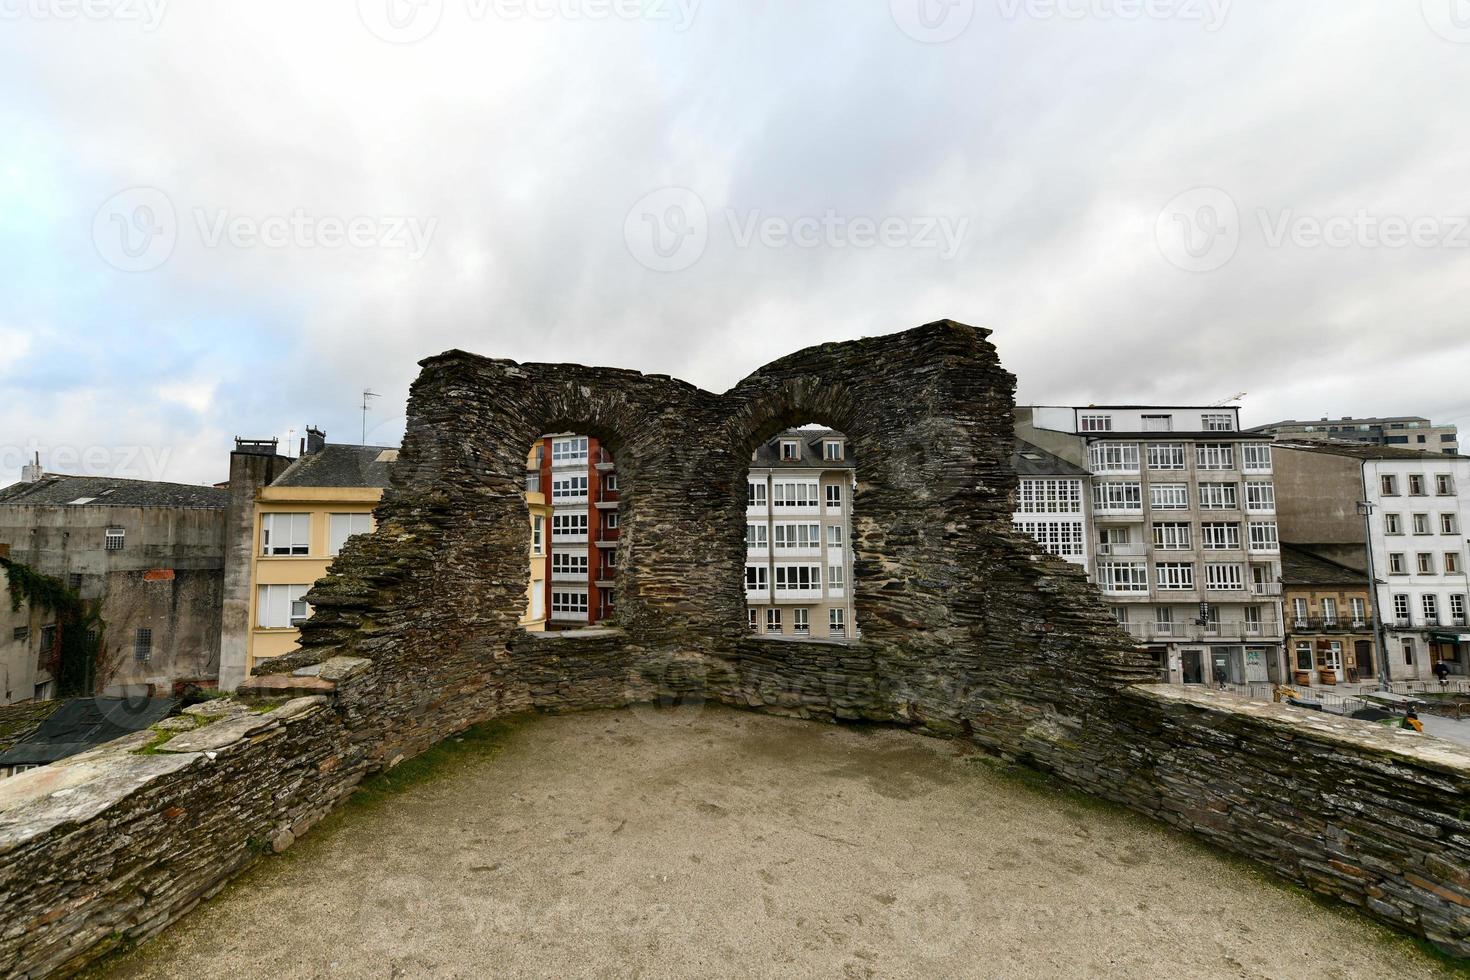 View from the Roman wall of Lugo. The walls of Lugo were built in the later part of the 3rd century to defend the Roman town of Lucus. photo